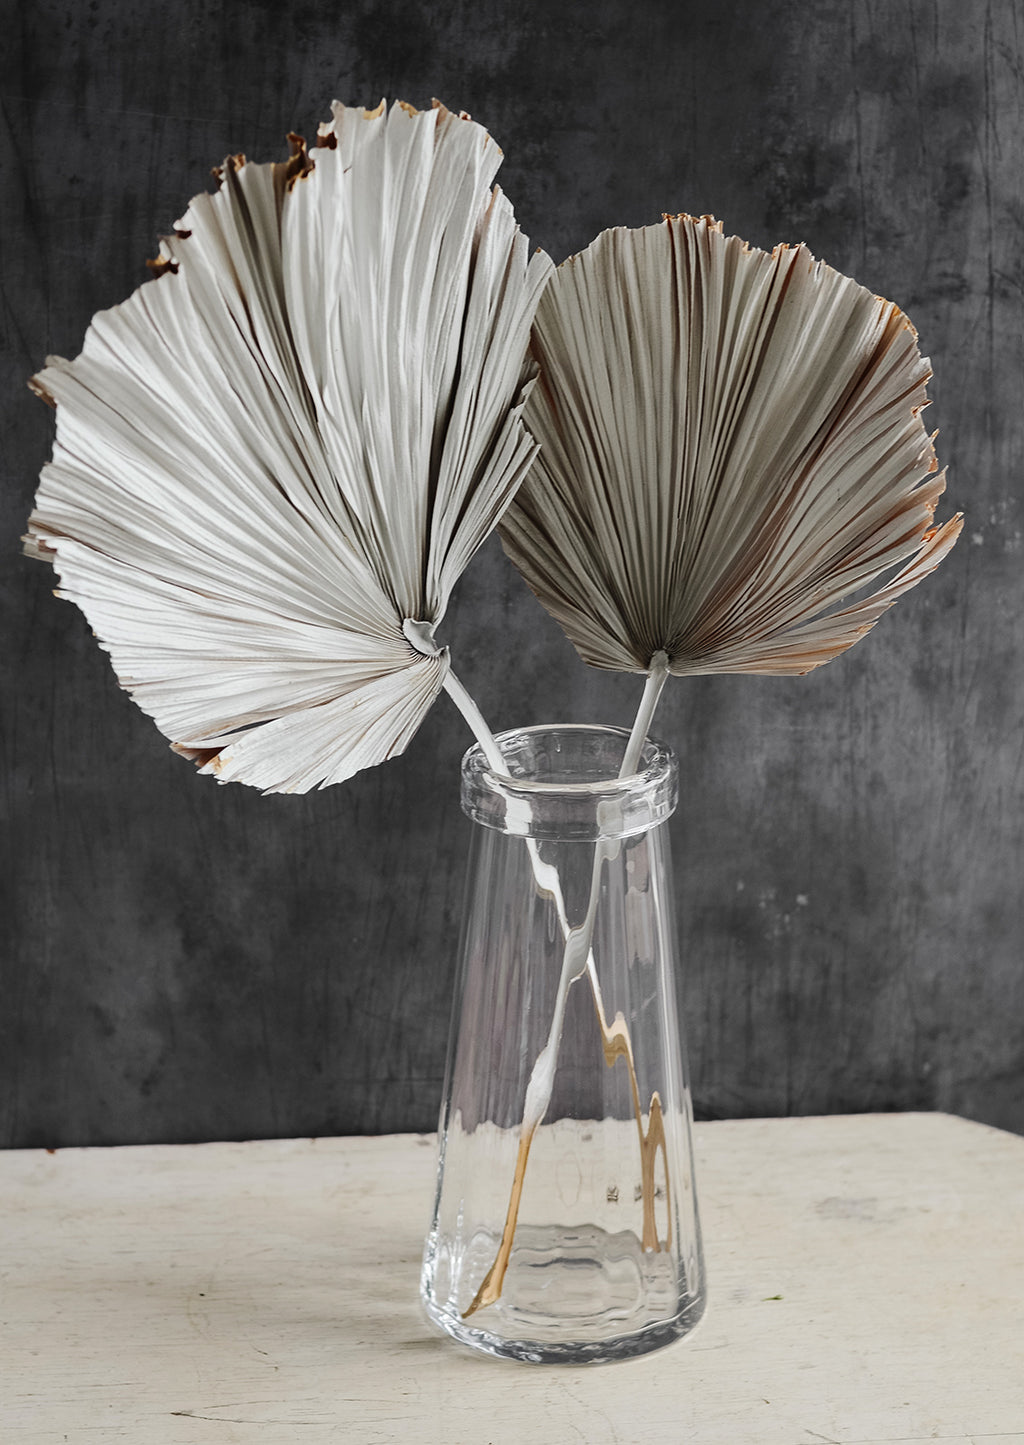 2: A tall, clear glass vase with two white dried fan palm leaves.